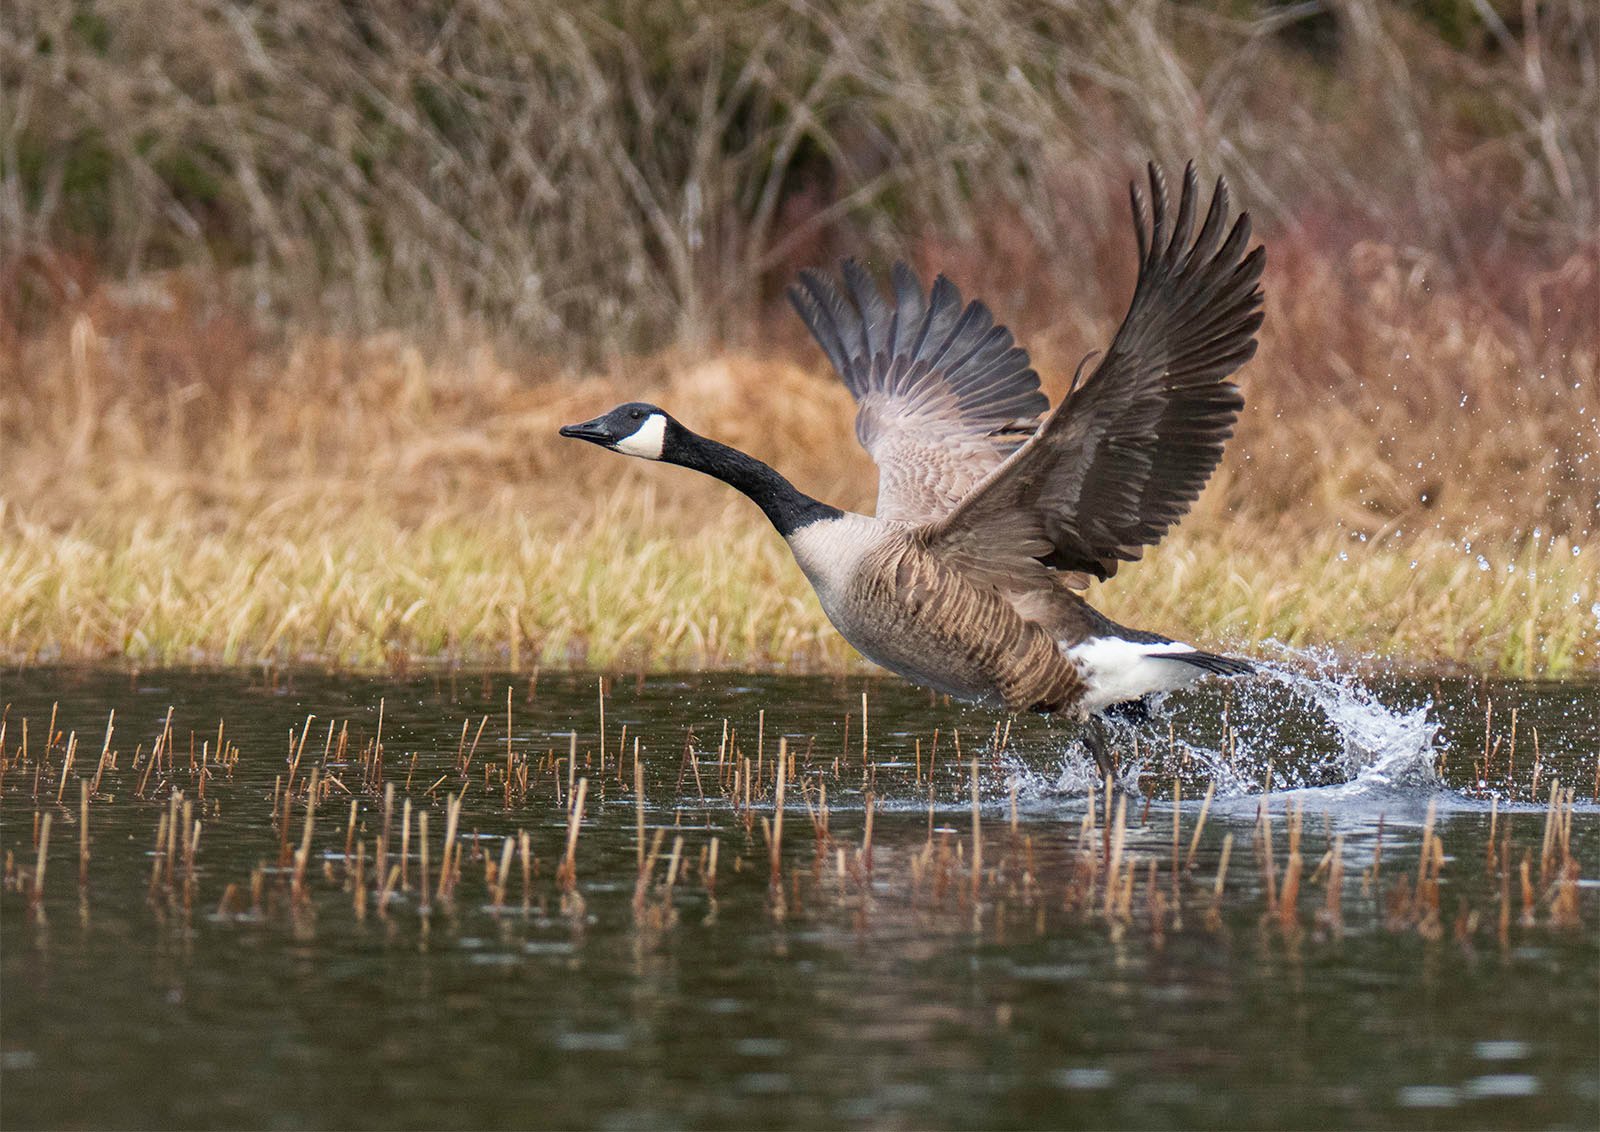 A canada goose takes off from a pond, wings spread wide and water droplets splashing, with tall, dried grasses in the background.